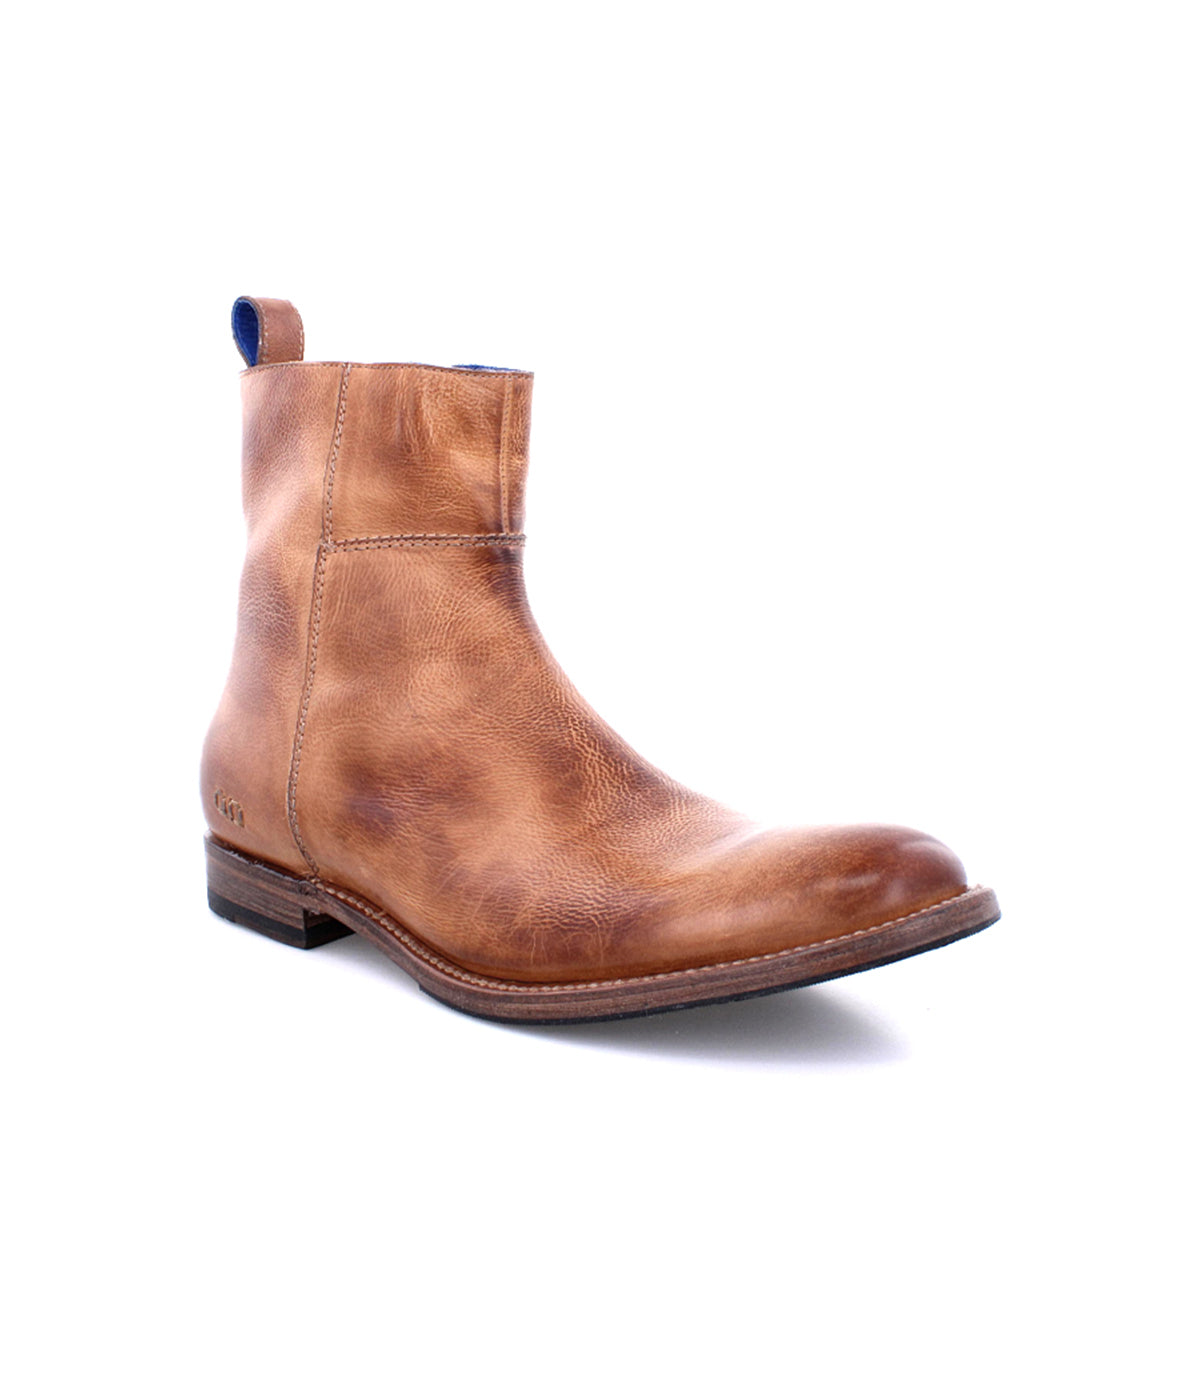 A single Bed Stu Kaldi brown leather ankle boot with a low heel and elastic side panel, displayed against a white background.